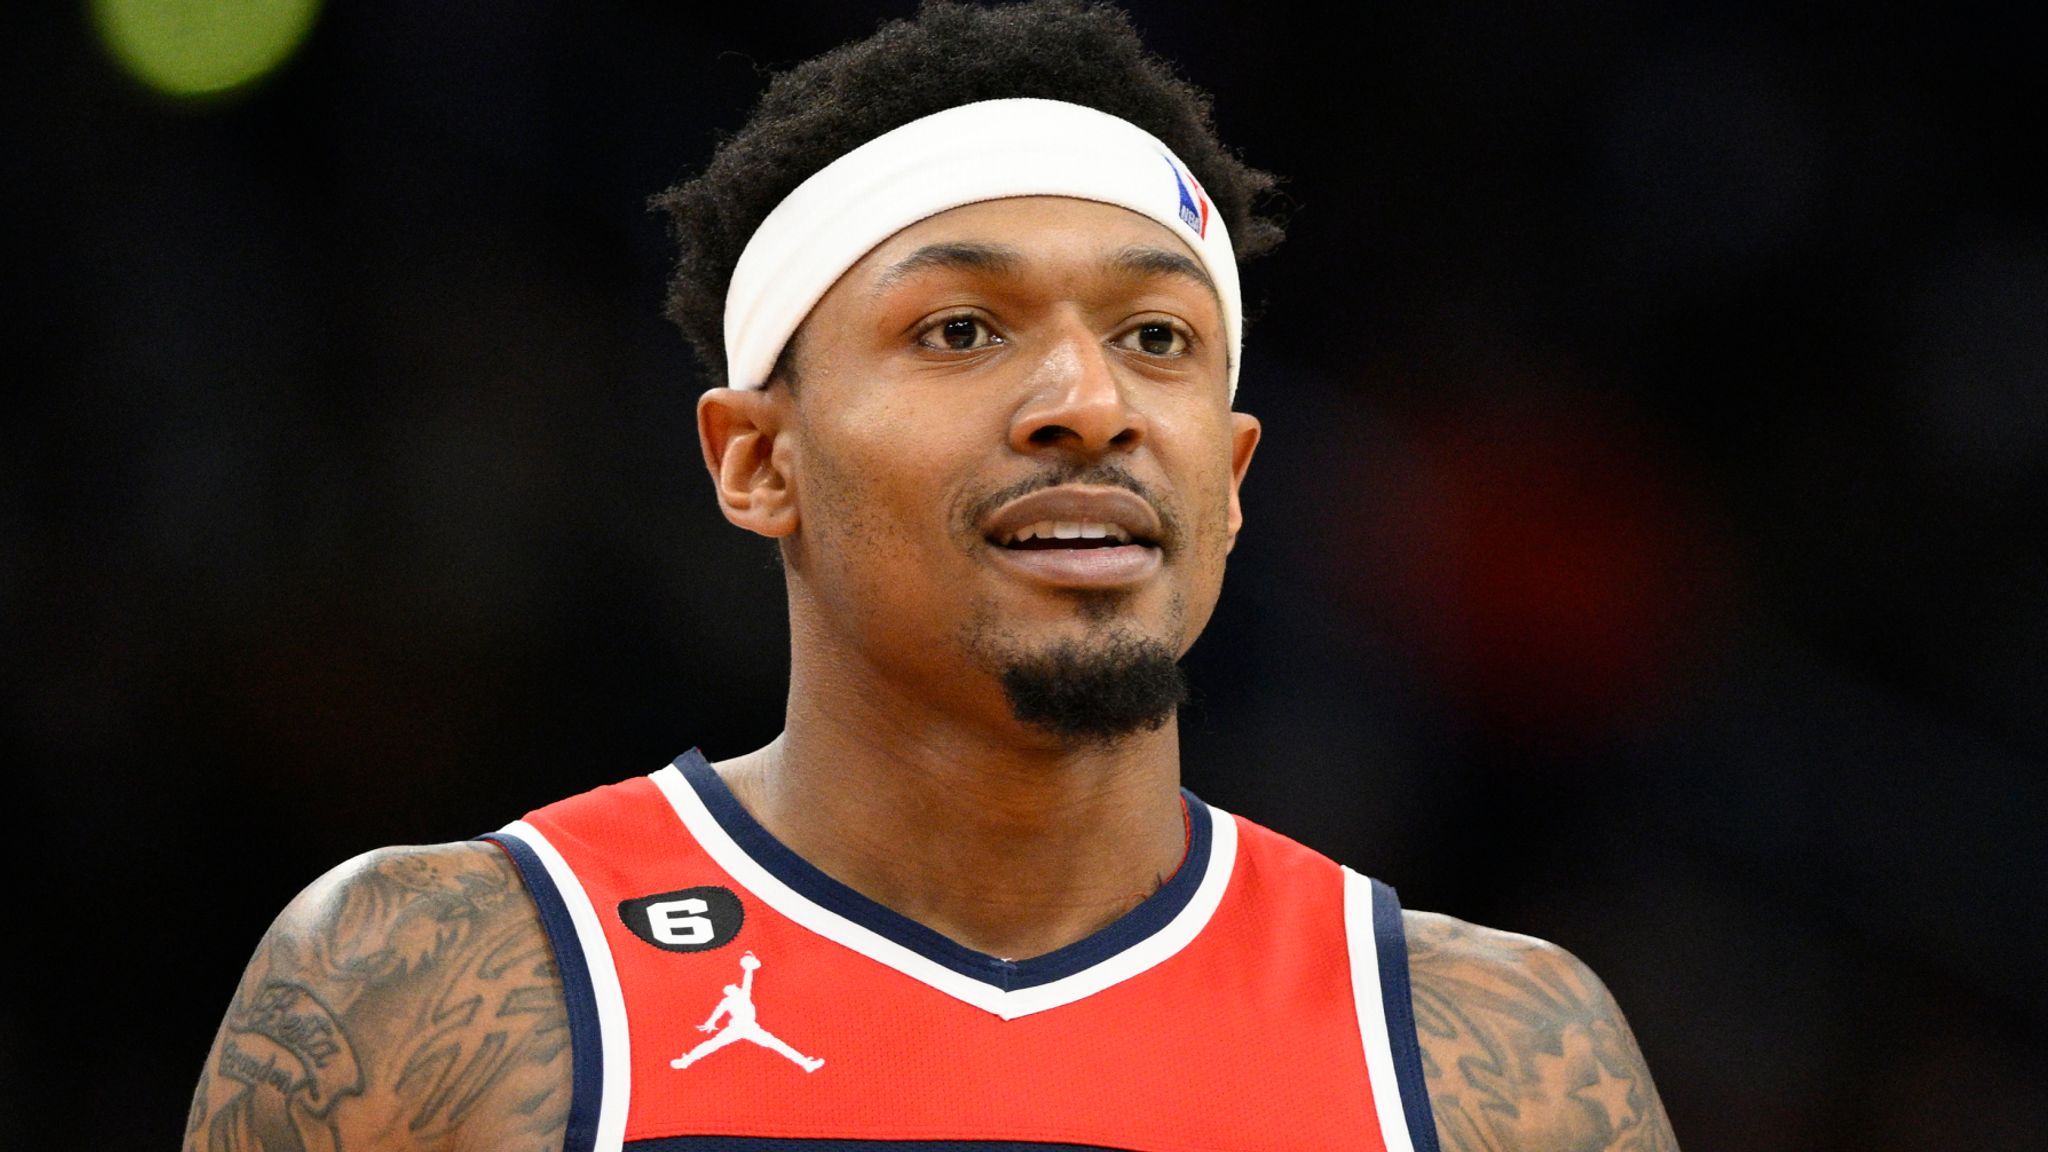 NBA: Bradley Beal makes big plays to lift Wizards over Hawks